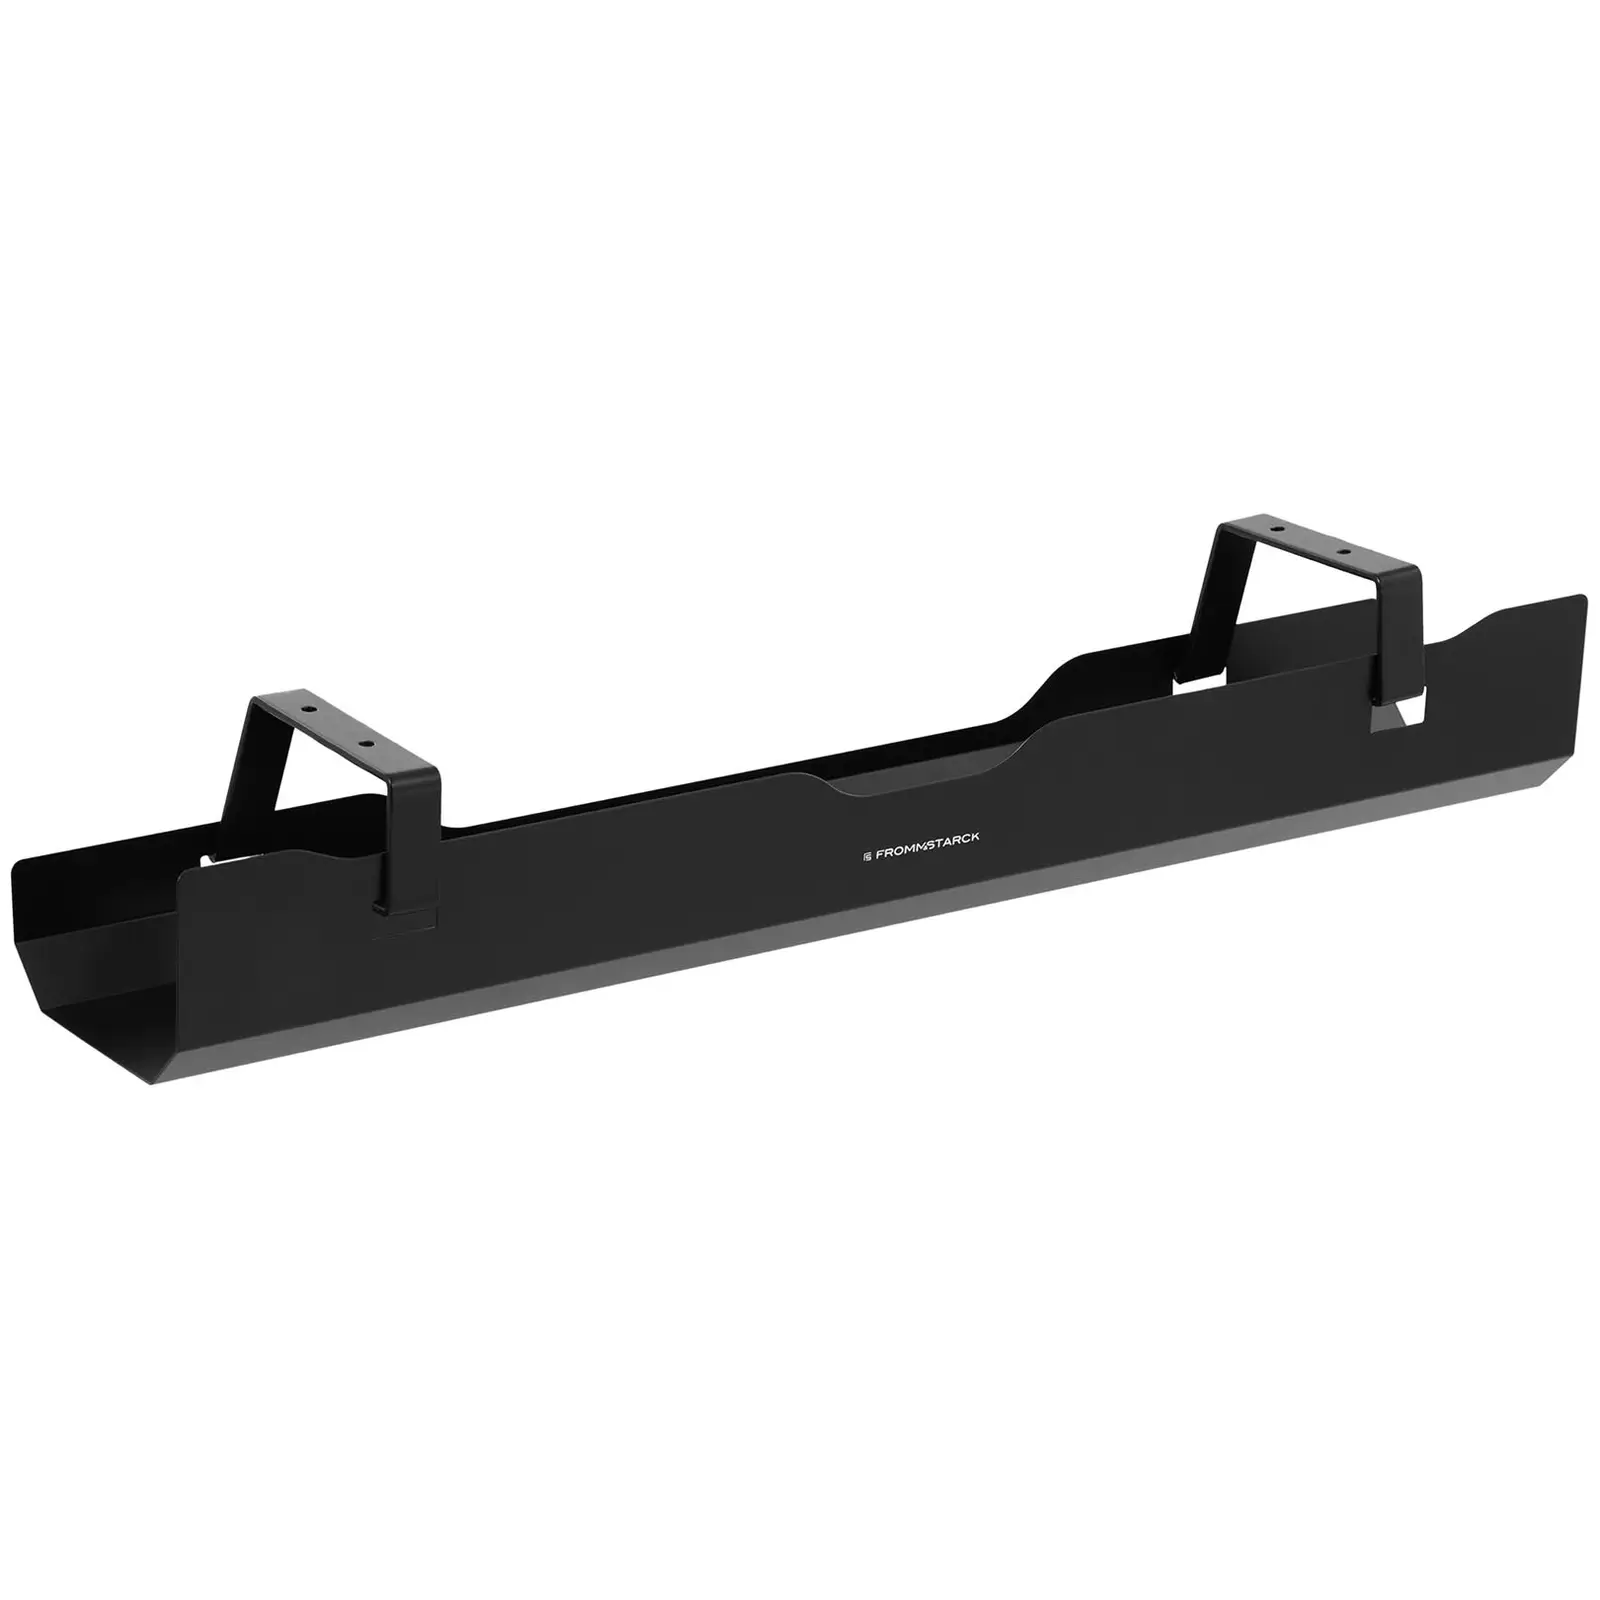 Cable Management Tray - 600 x 135 x 108 mm - Black